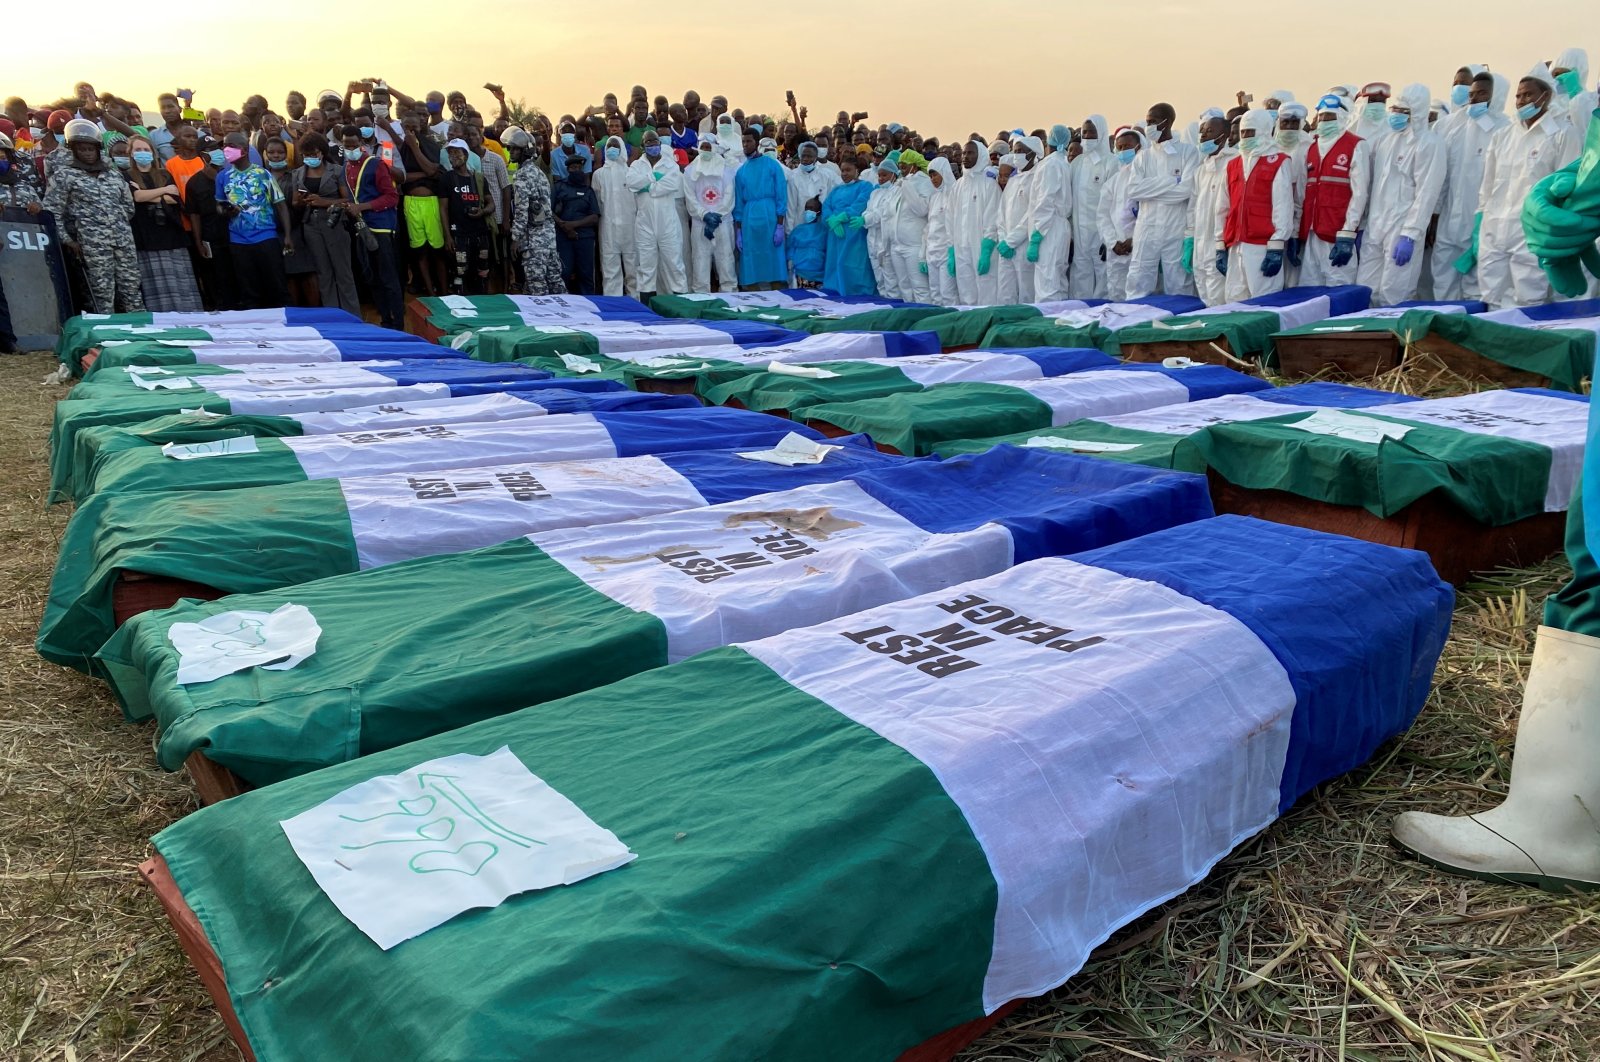 Coffins containing the remains of victims of the fuel tanker explosion are pictured during a burial ceremony at a cemetery in Freetown, Sierra Leone, Nov. 8, 2021. (Reuters Photo)